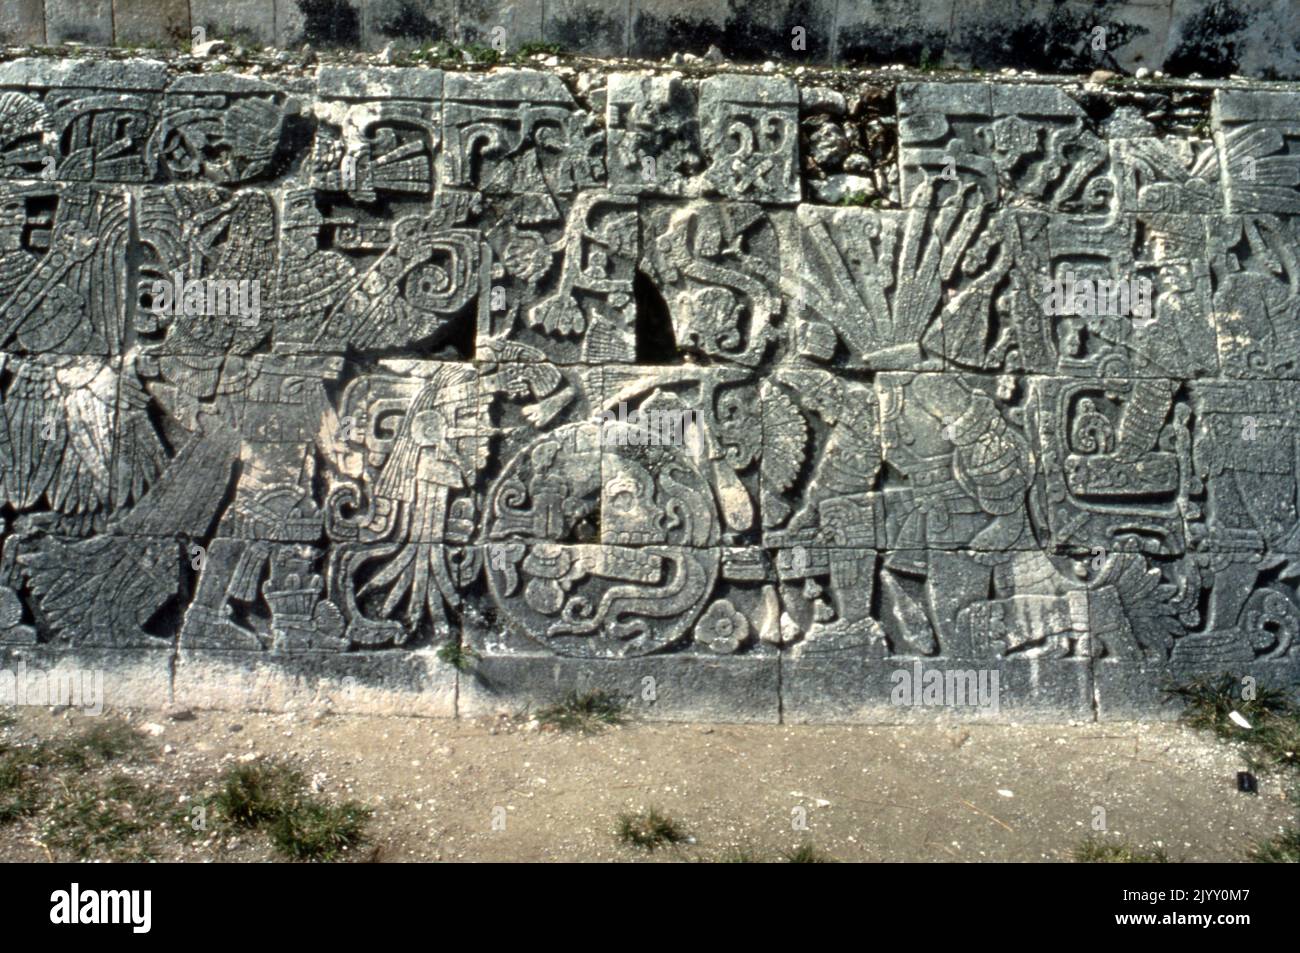 relief depicting ball players at the Great Ball Court at Chichen Itza, a pre-Columbian city built by the Maya people of the Terminal Classic period. Chichen Itza was a major focal point in the Northern Maya Lowlands from the Late Classic (c. AD 600-900), into the early portion of the Post classic period (c. AD 900-1200). The Great Ball Court was used for playing the Mesoamerican ballgame. It is the largest and best preserved ball court in ancient Mesoamerica.[41] It measures 168 by 70 metres (551 by 230 ft). Stock Photo